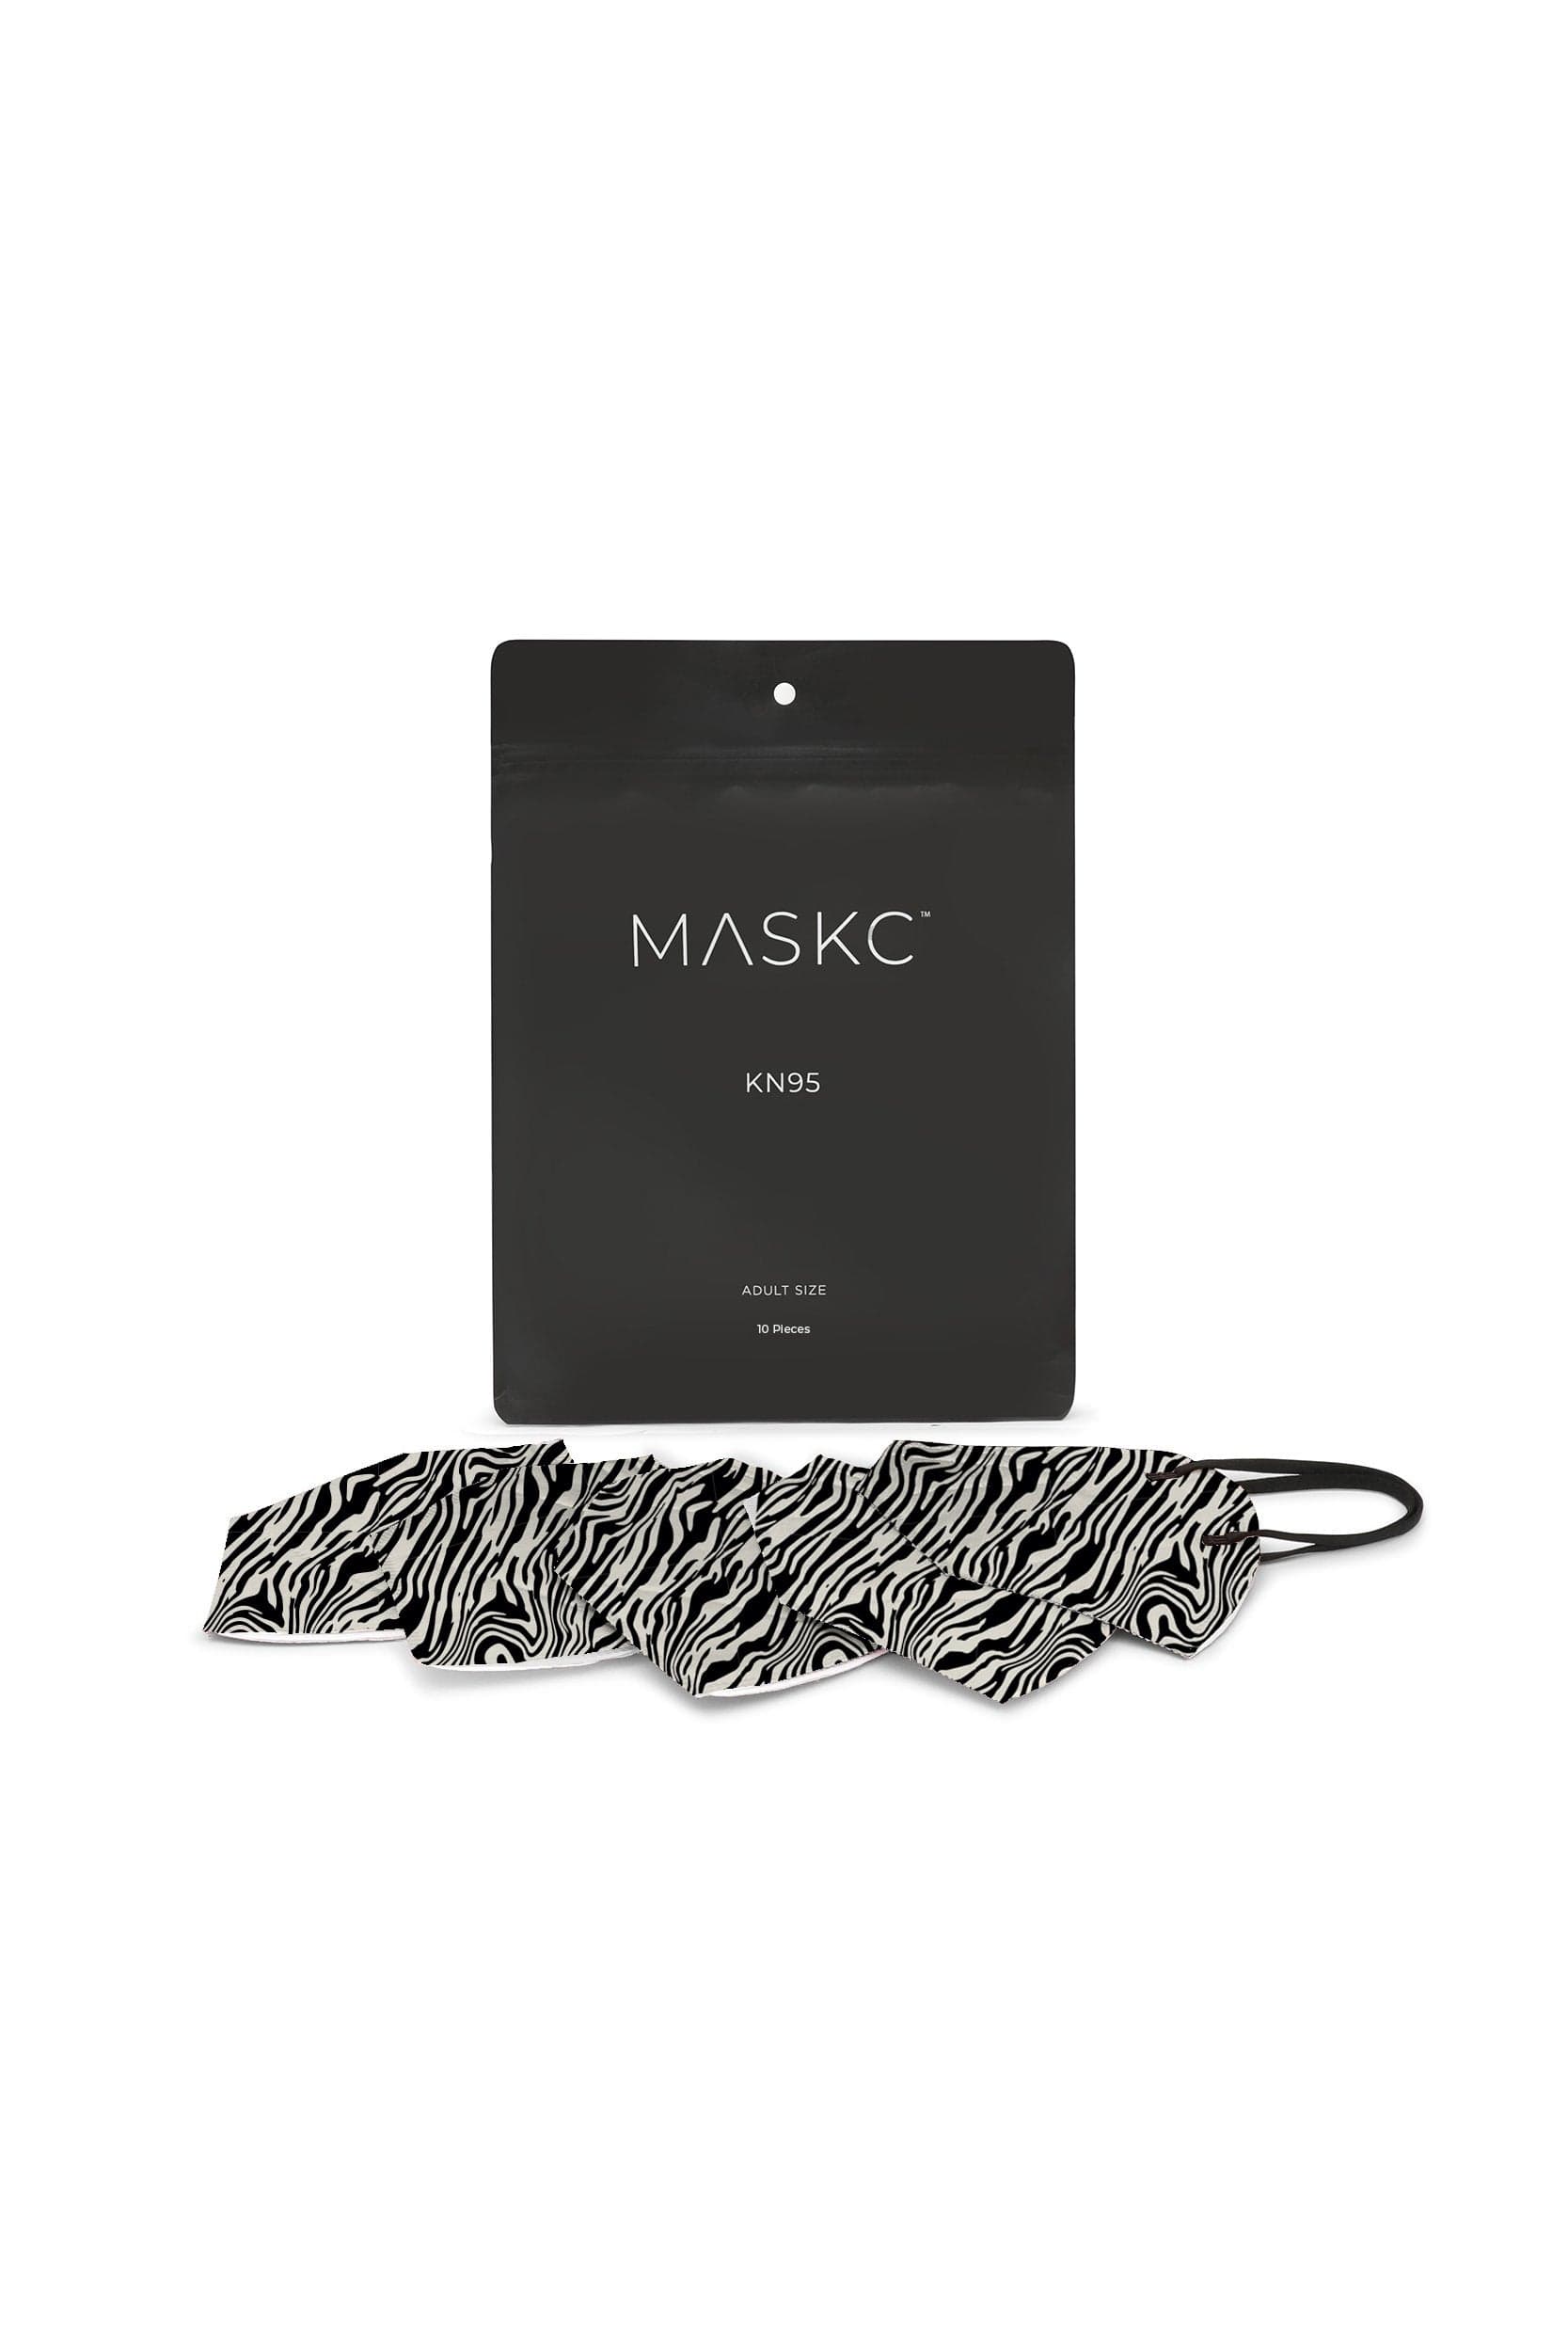 Pack of Zebra KN95 face masks. Each pack contains stylish high quality face masks. 